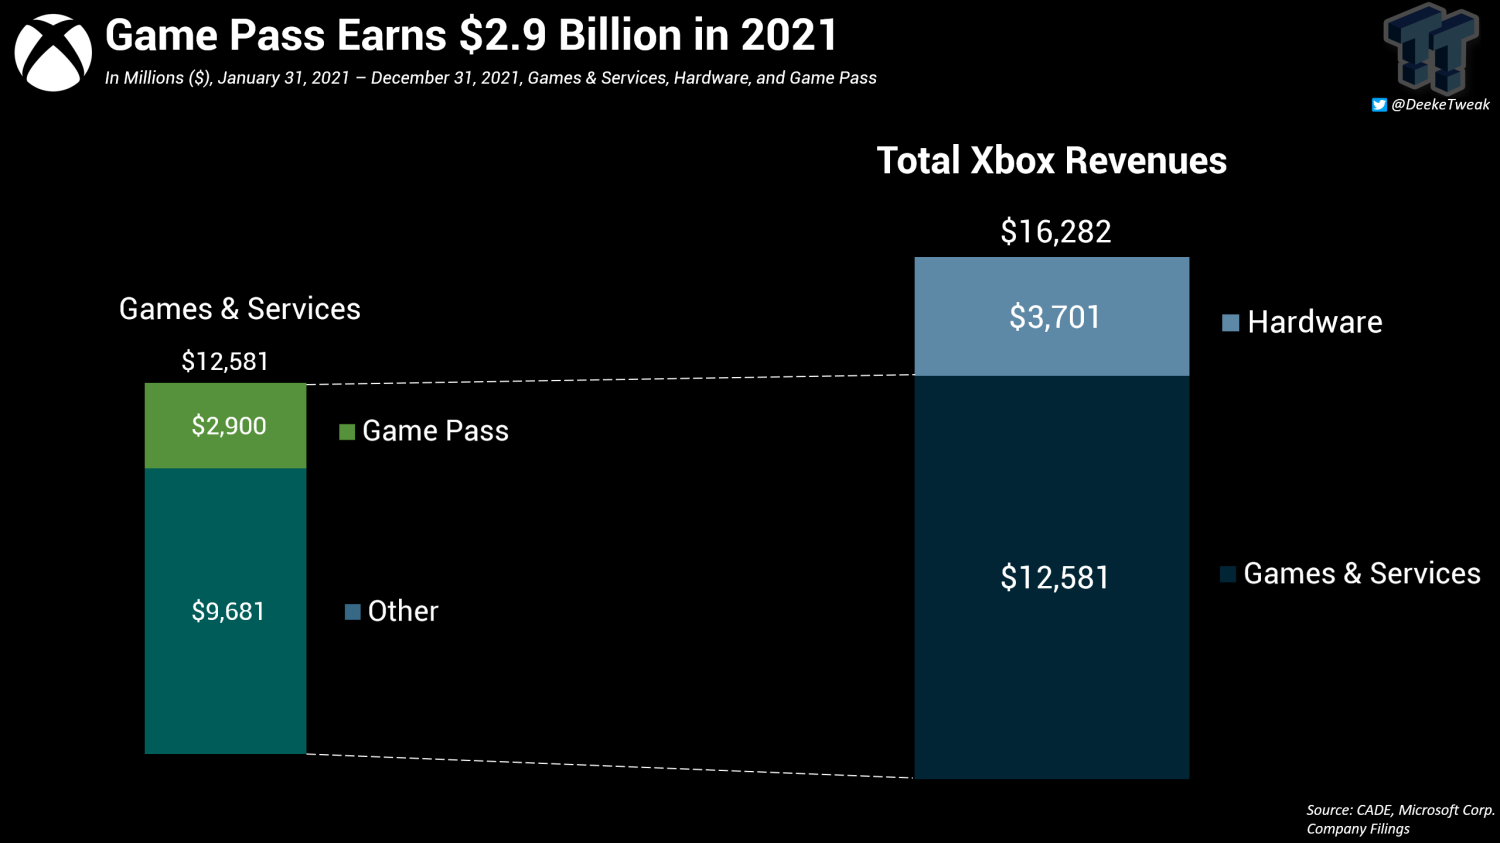 TweakTown Enlarged Image - As per data from Brazilian regulator CADE, Game Pass allegedly generated $2.9 billion revenues throughout 2021 and made up nearly 18% of total Xbox earnings.